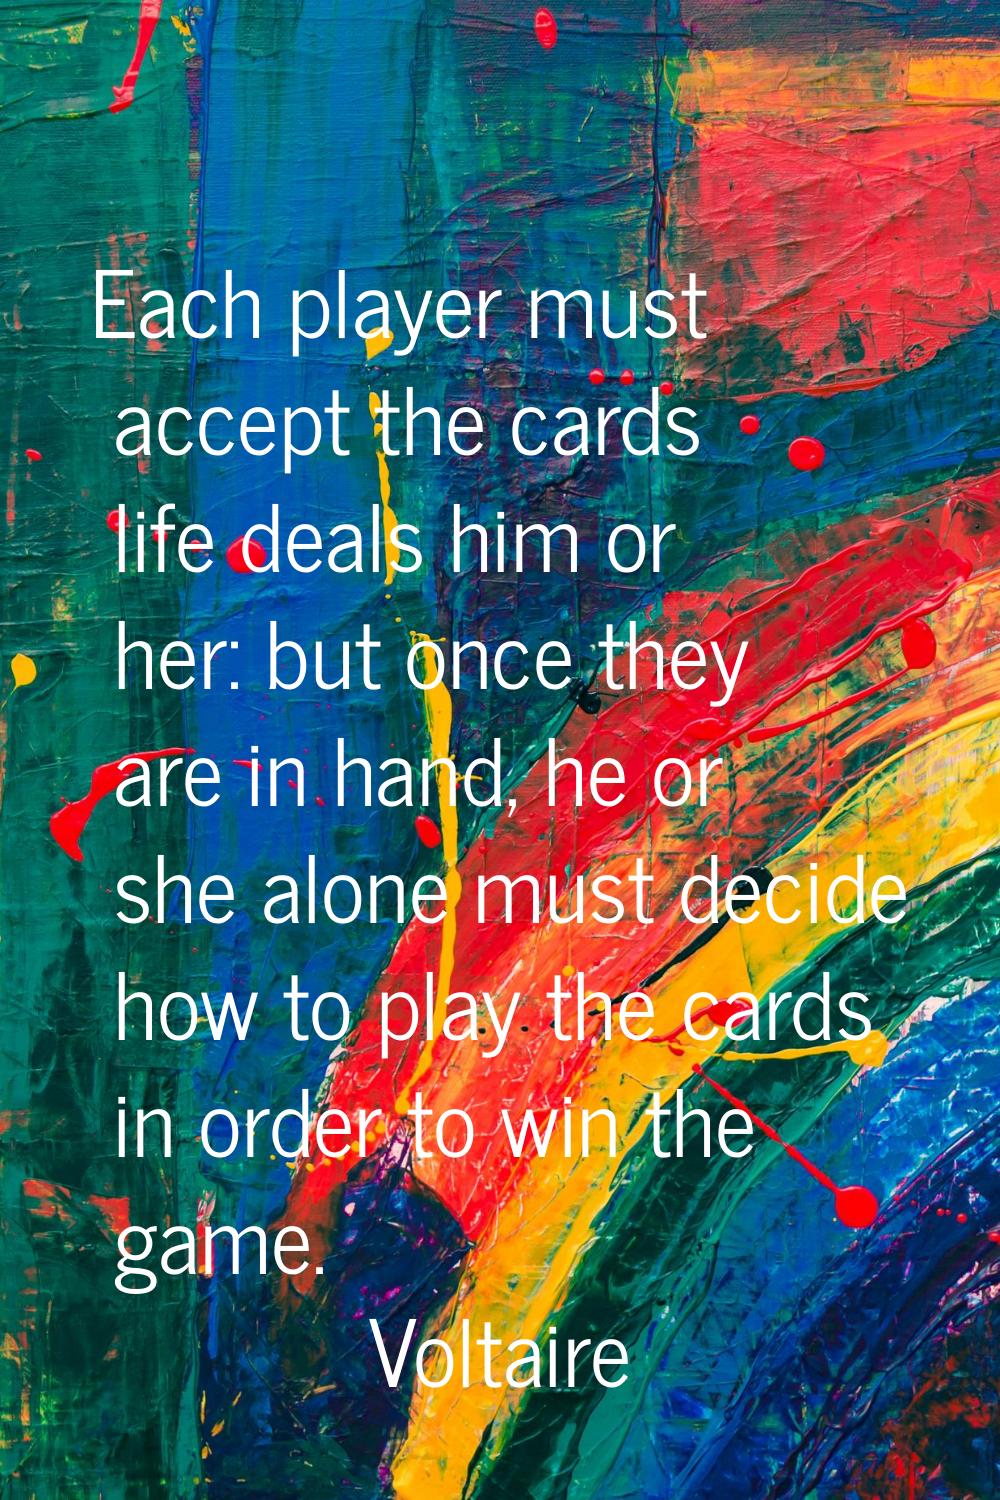 Each player must accept the cards life deals him or her: but once they are in hand, he or she alone